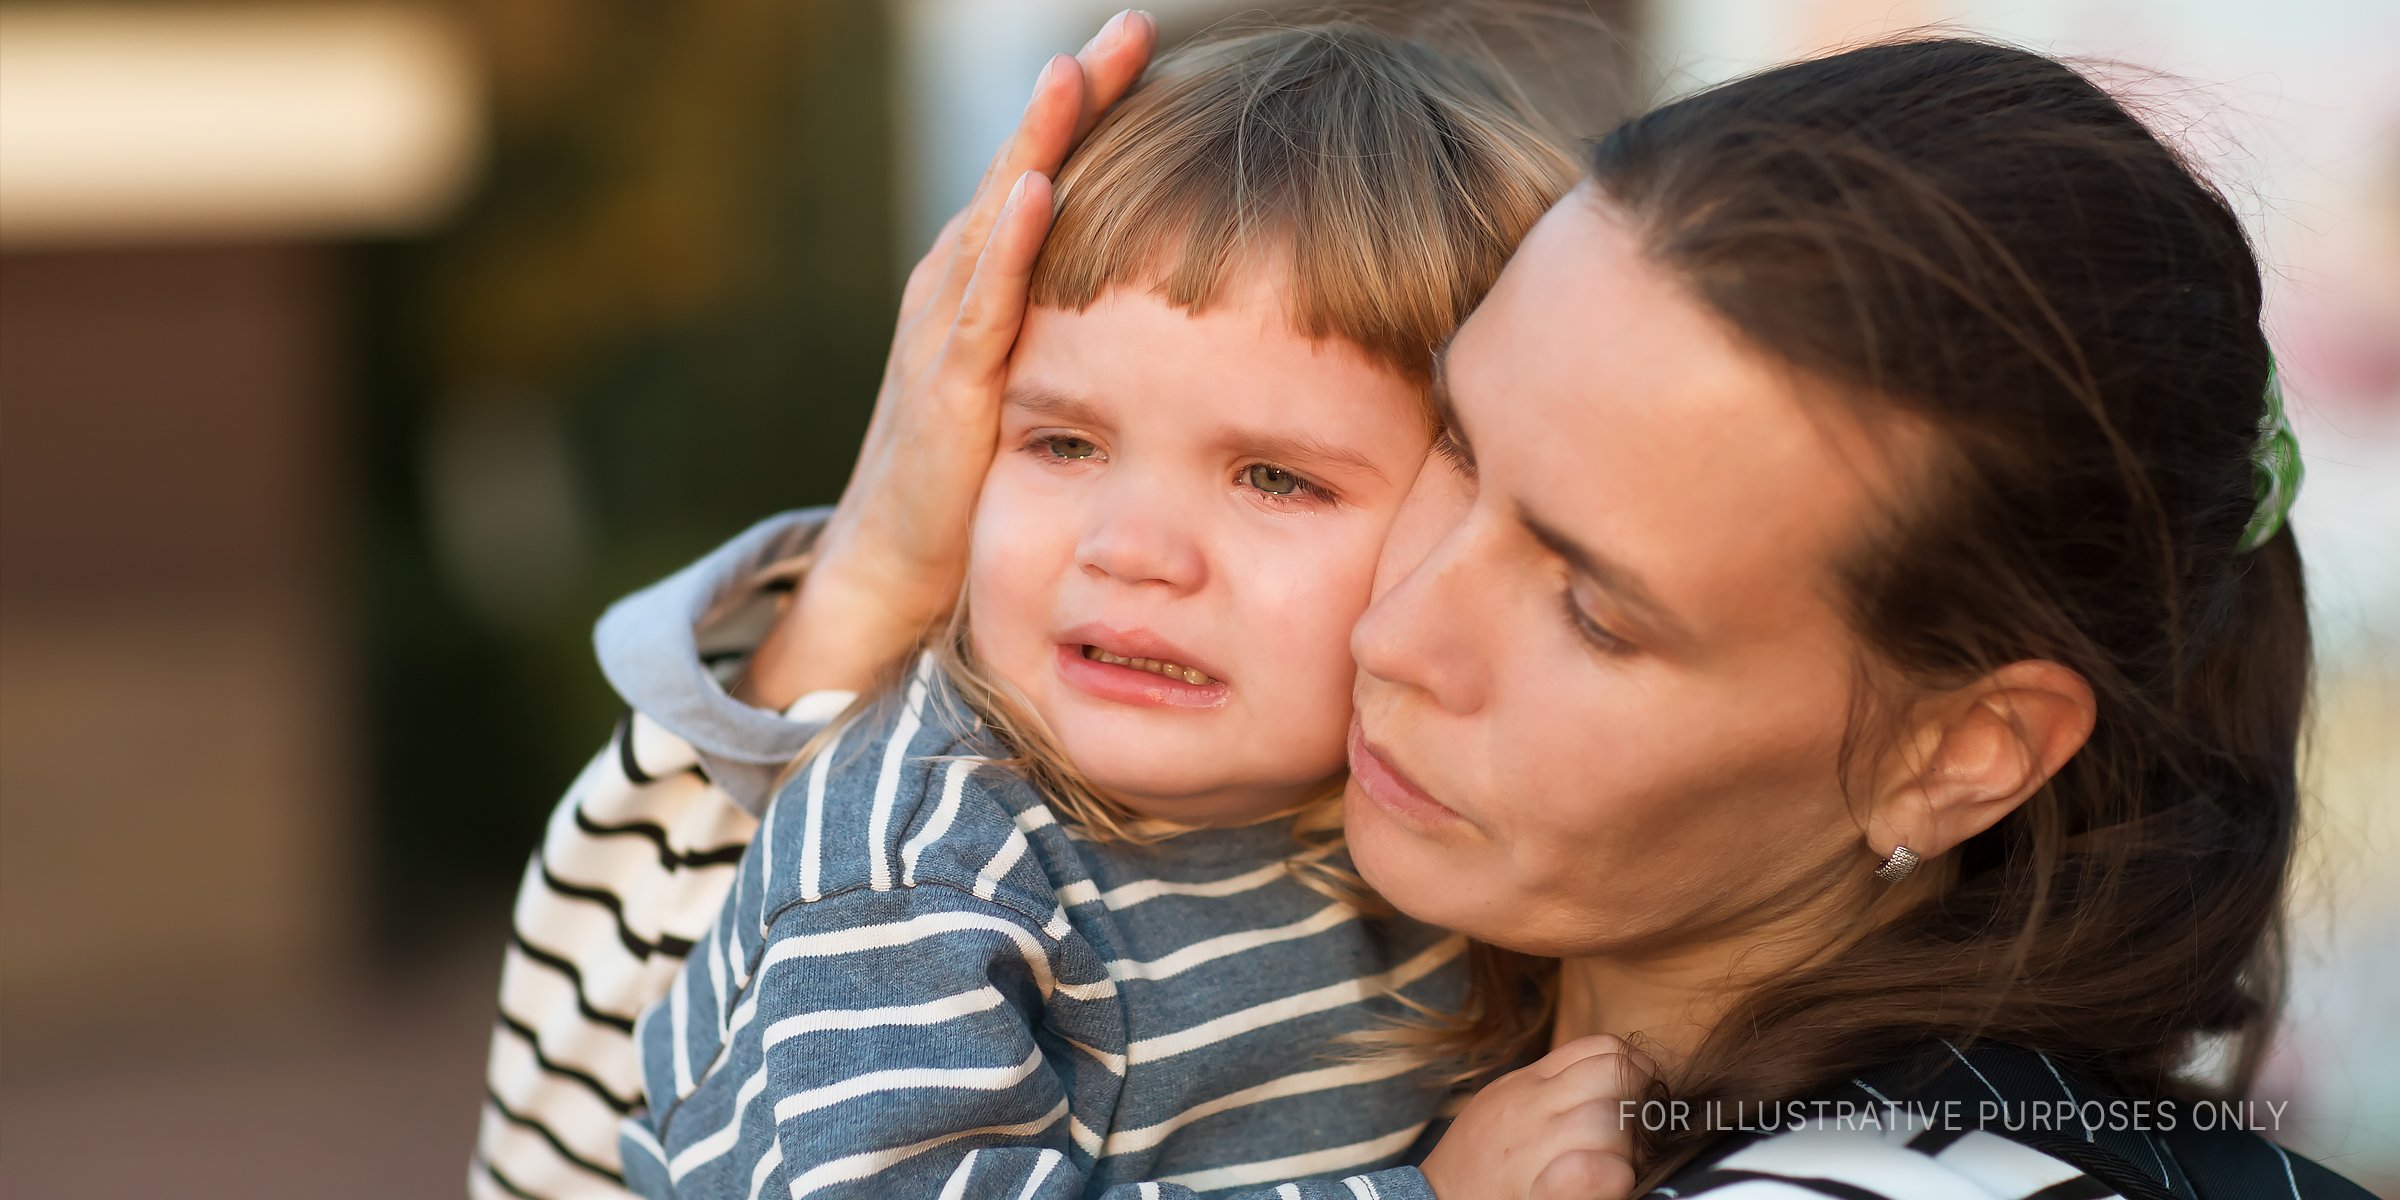 Woman Consoling A Crying Child. | Source: Shutterstock